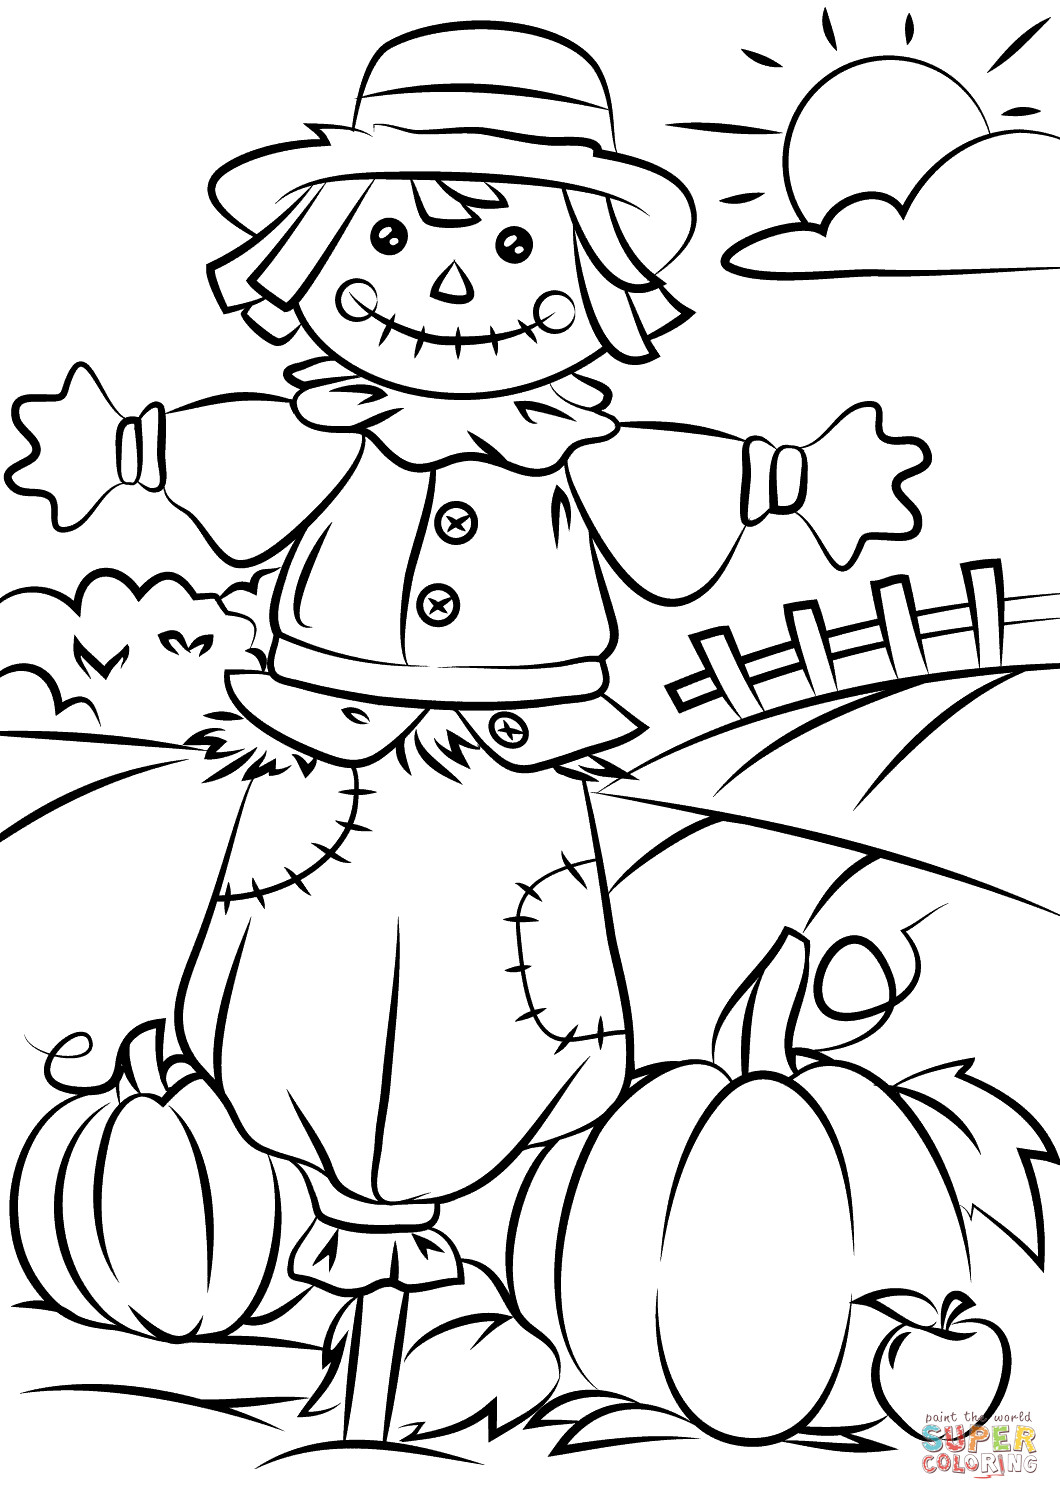 Free Printable Fall Coloring Pages
 Autumn Scene with Scarecrow coloring page